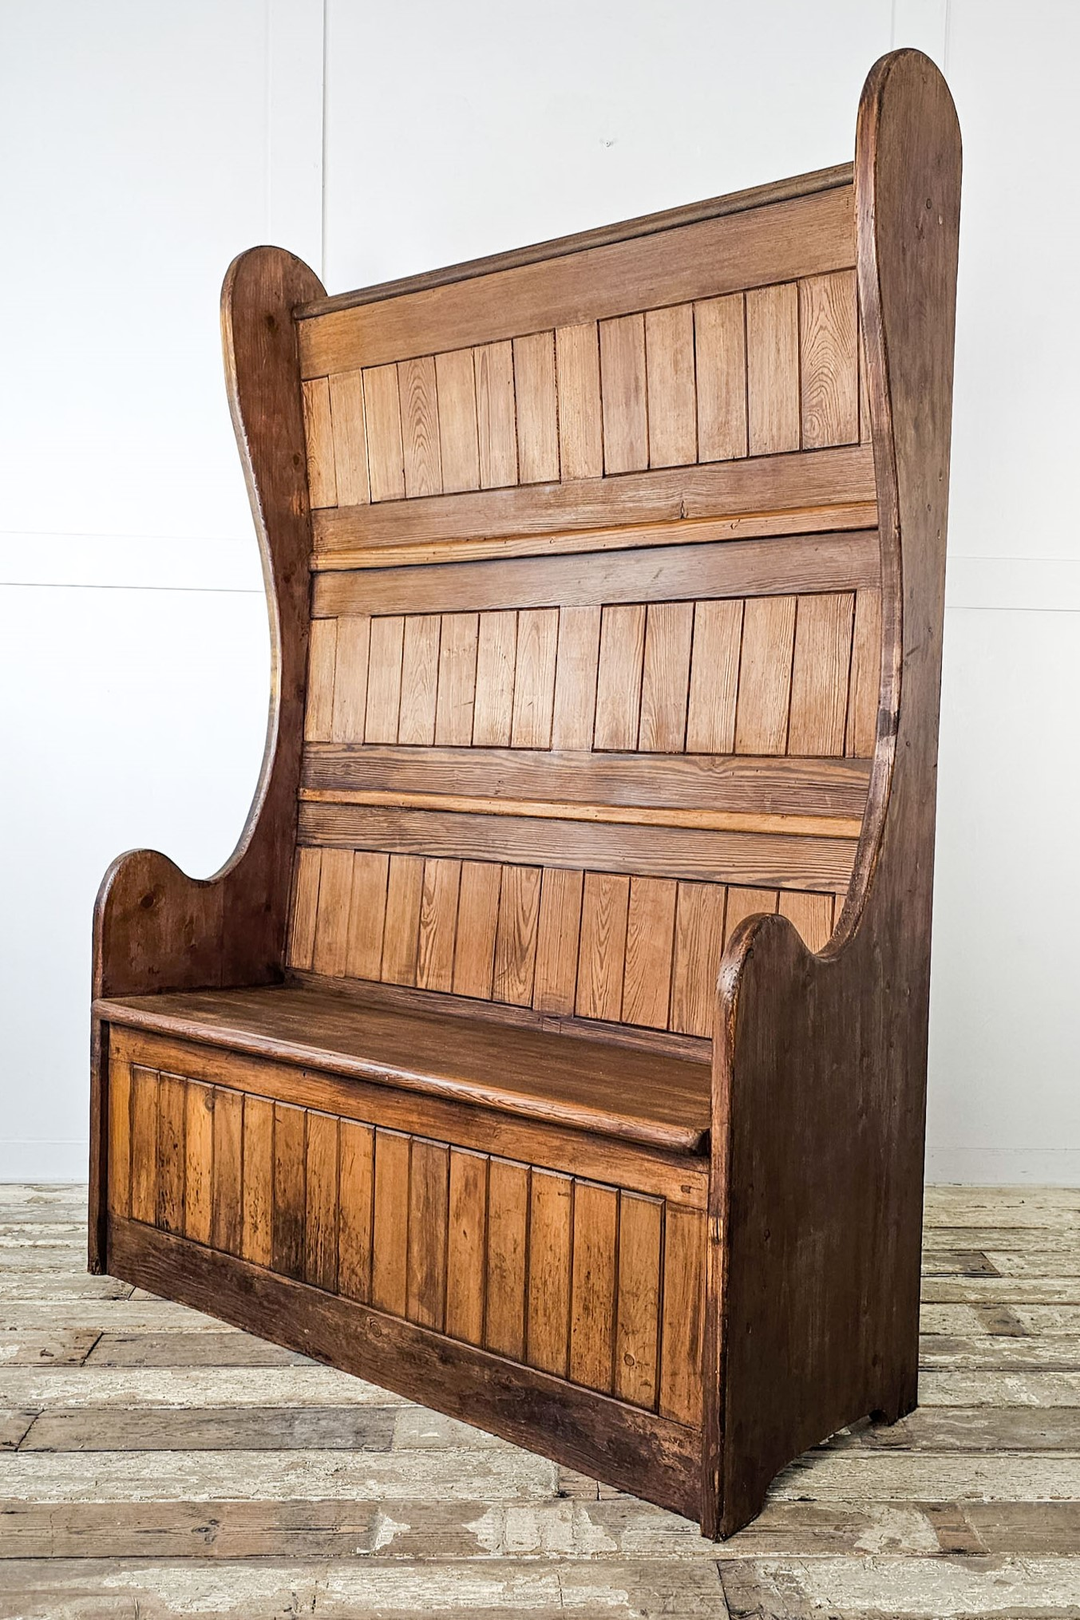 An early 20th Century french station bench with seating on both sides - angled view